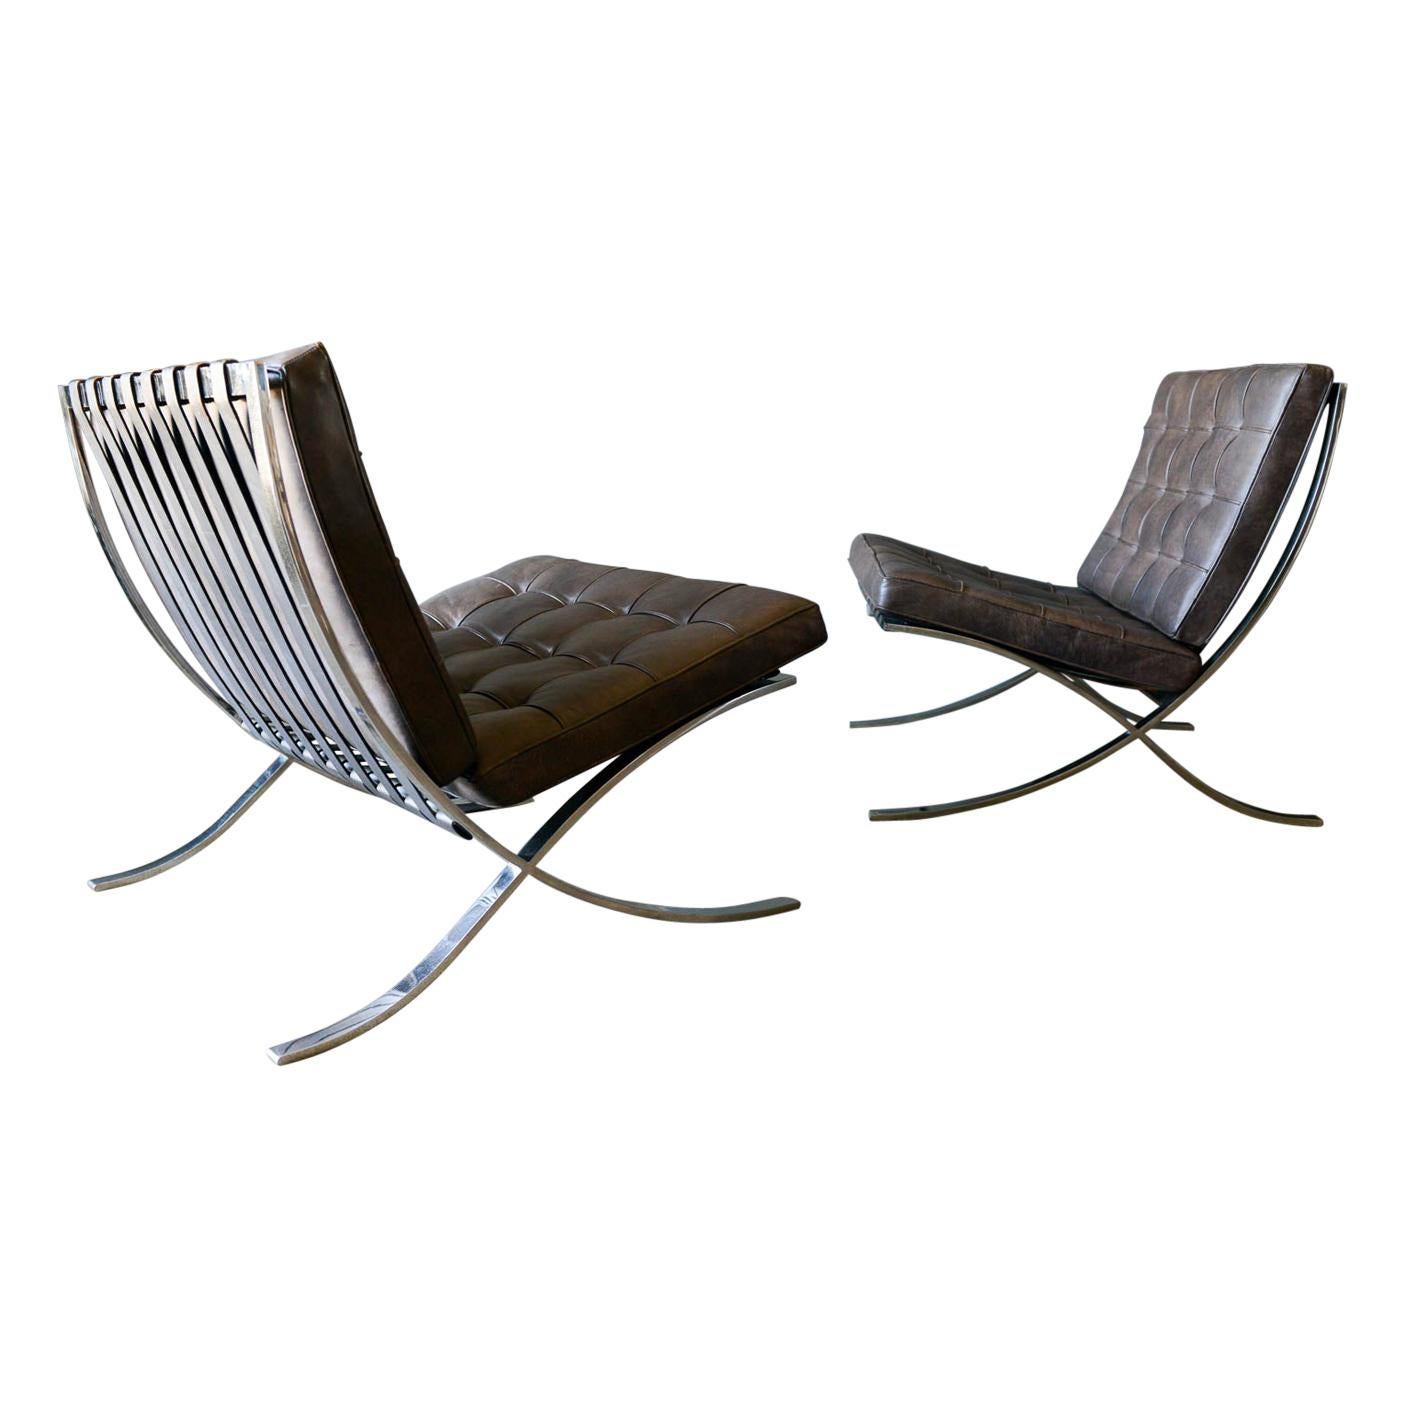 Rare Barcelona Chairs by Gerald R. Griffith for Ludwig Mies van der Rohe, 1970